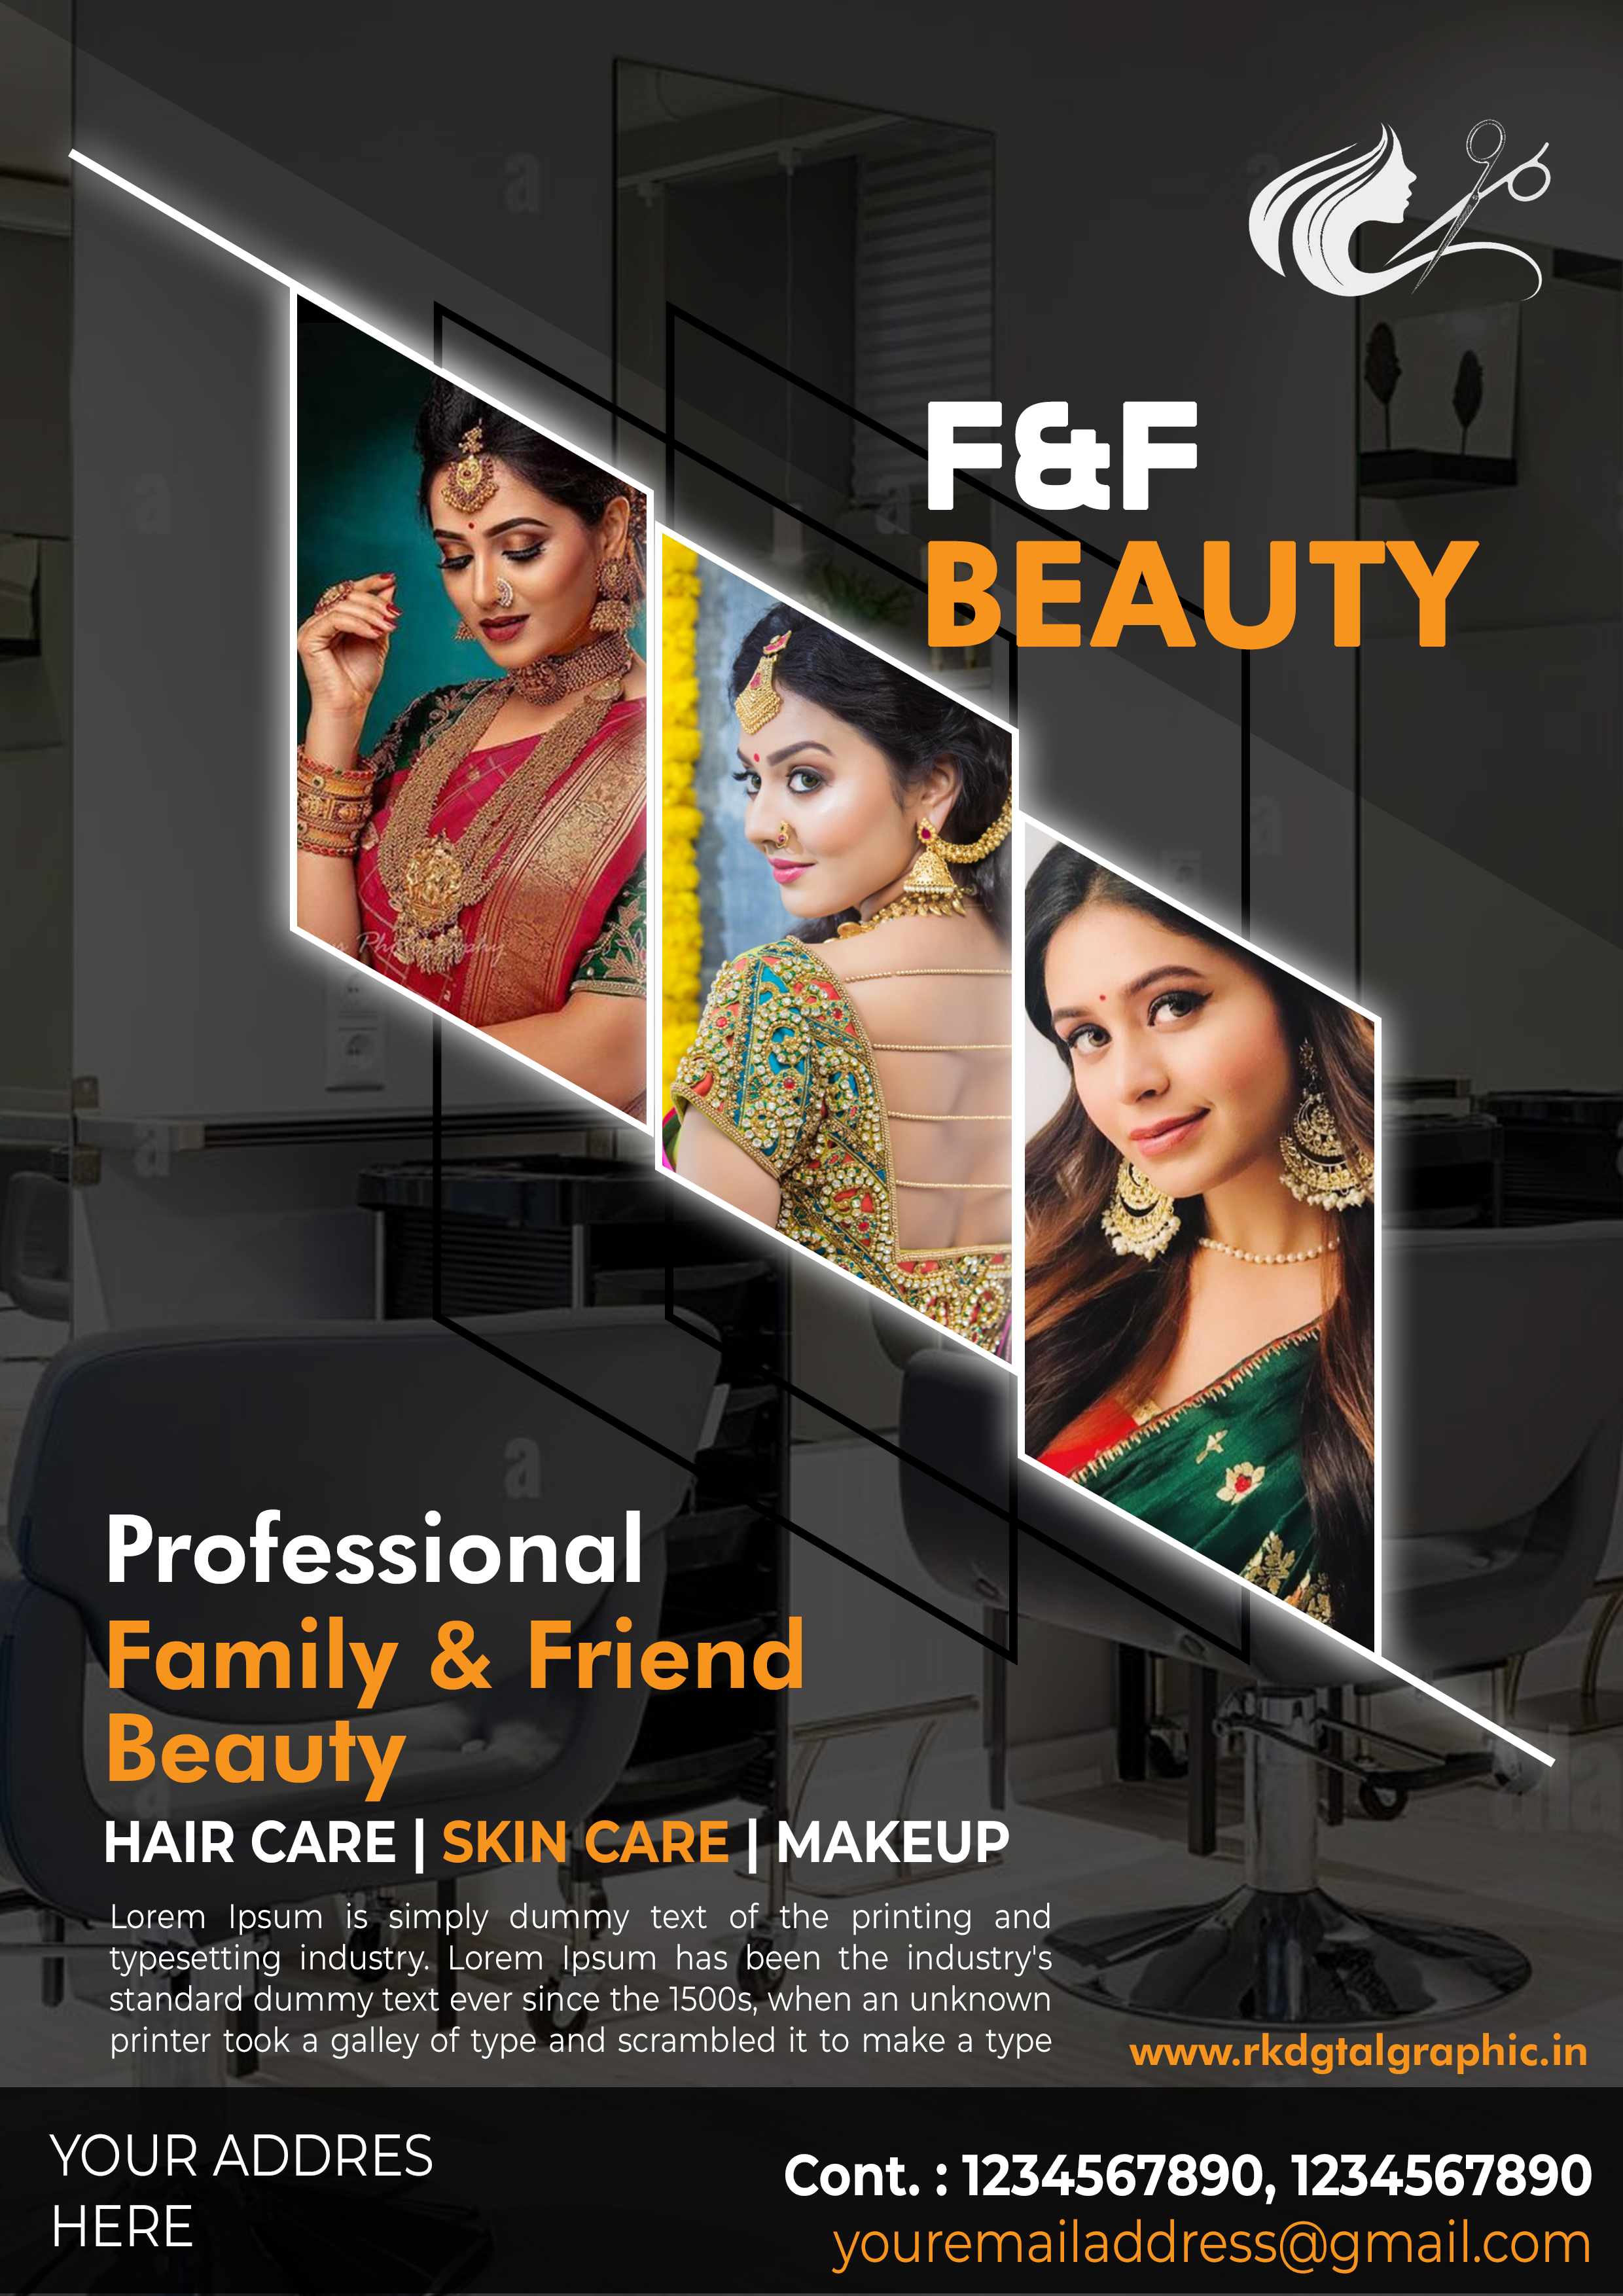 Download Free PSD of Beauty Parlour Flyer Design - Free PSD